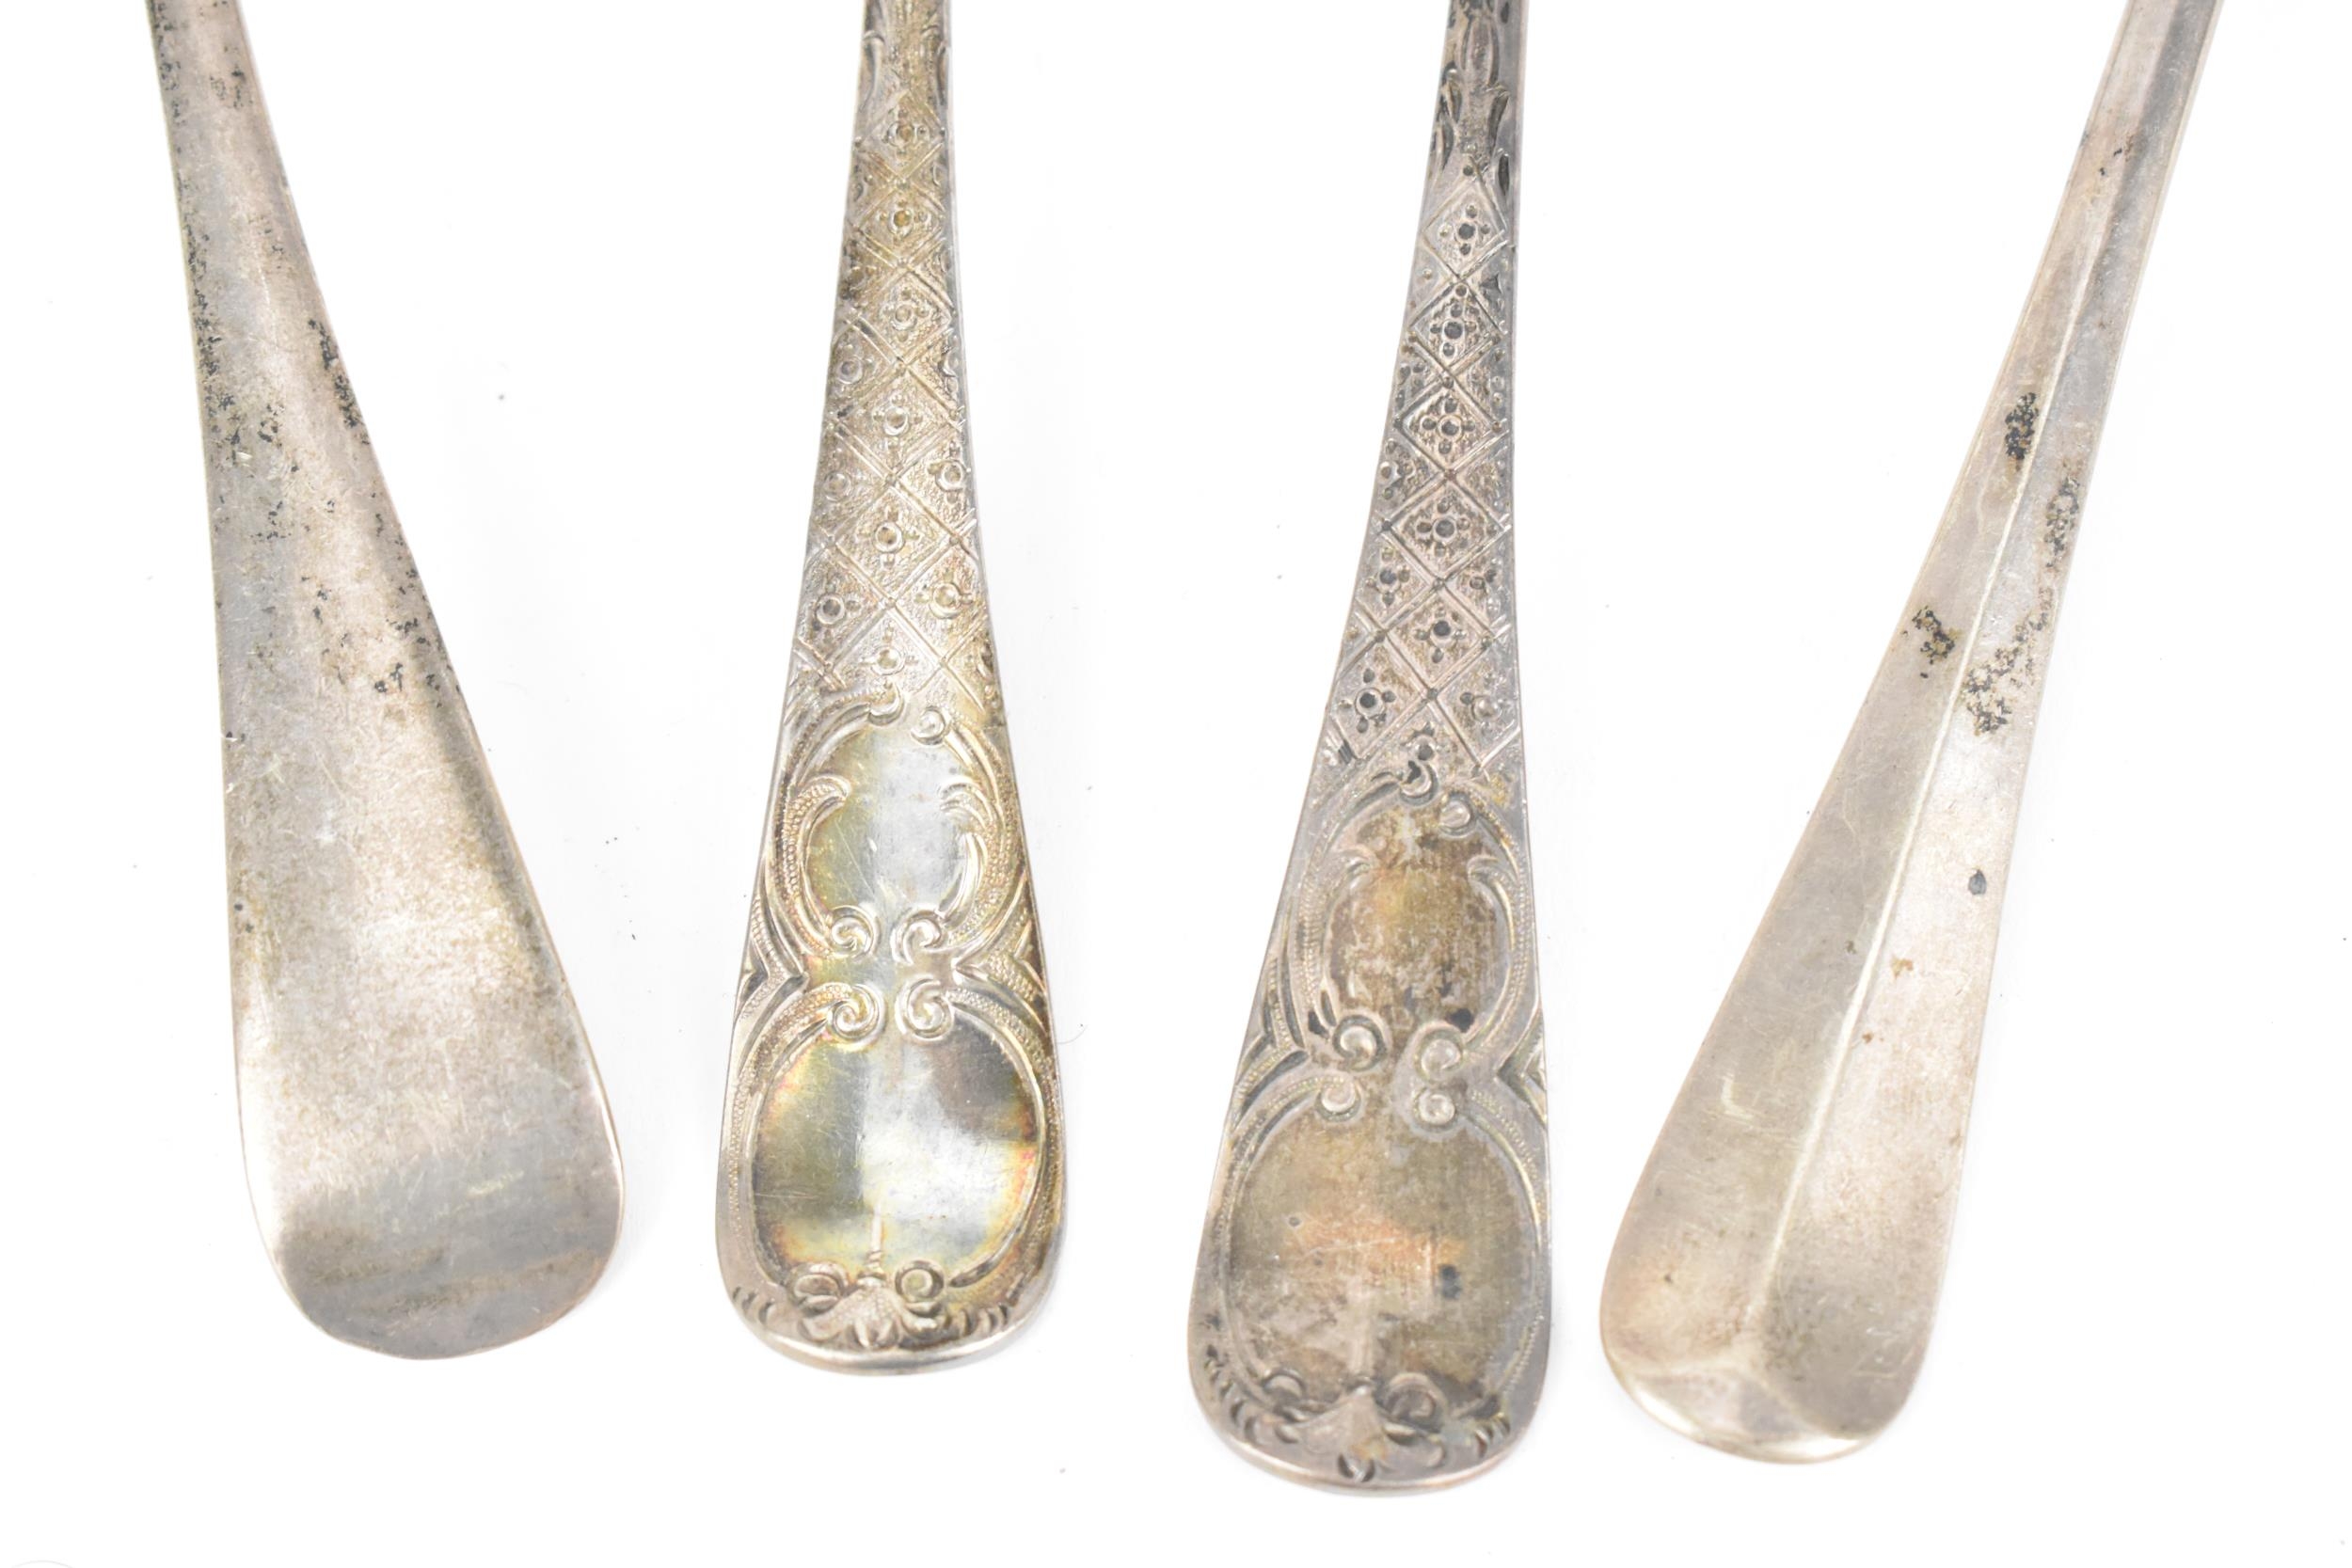 A pair of George III silver berry spoons by Samuel Godbehere, Edward Wigan & James Boult, London - Image 3 of 5